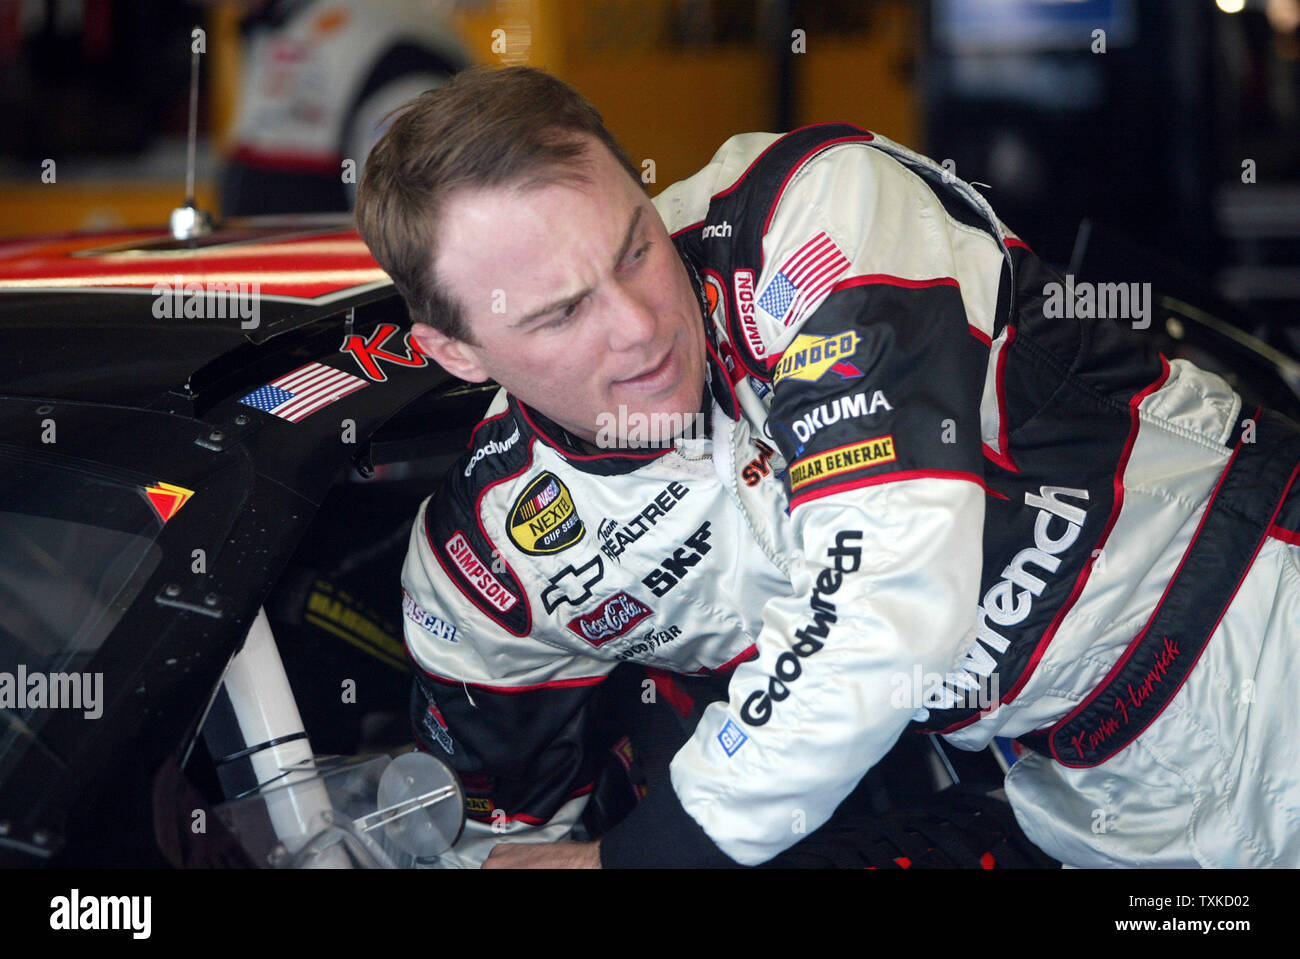 NASCAR driver Kevin Harvick checks his GM Goodwrench Chevrolet before the start of practice for the Bank of America 500 NASCAR Nextel Cup race at the Lowe's Motor Speedway near Charlotte, N.C., on October 12, 2006. (UPI Photo/Nell Redmond) Stock Photo